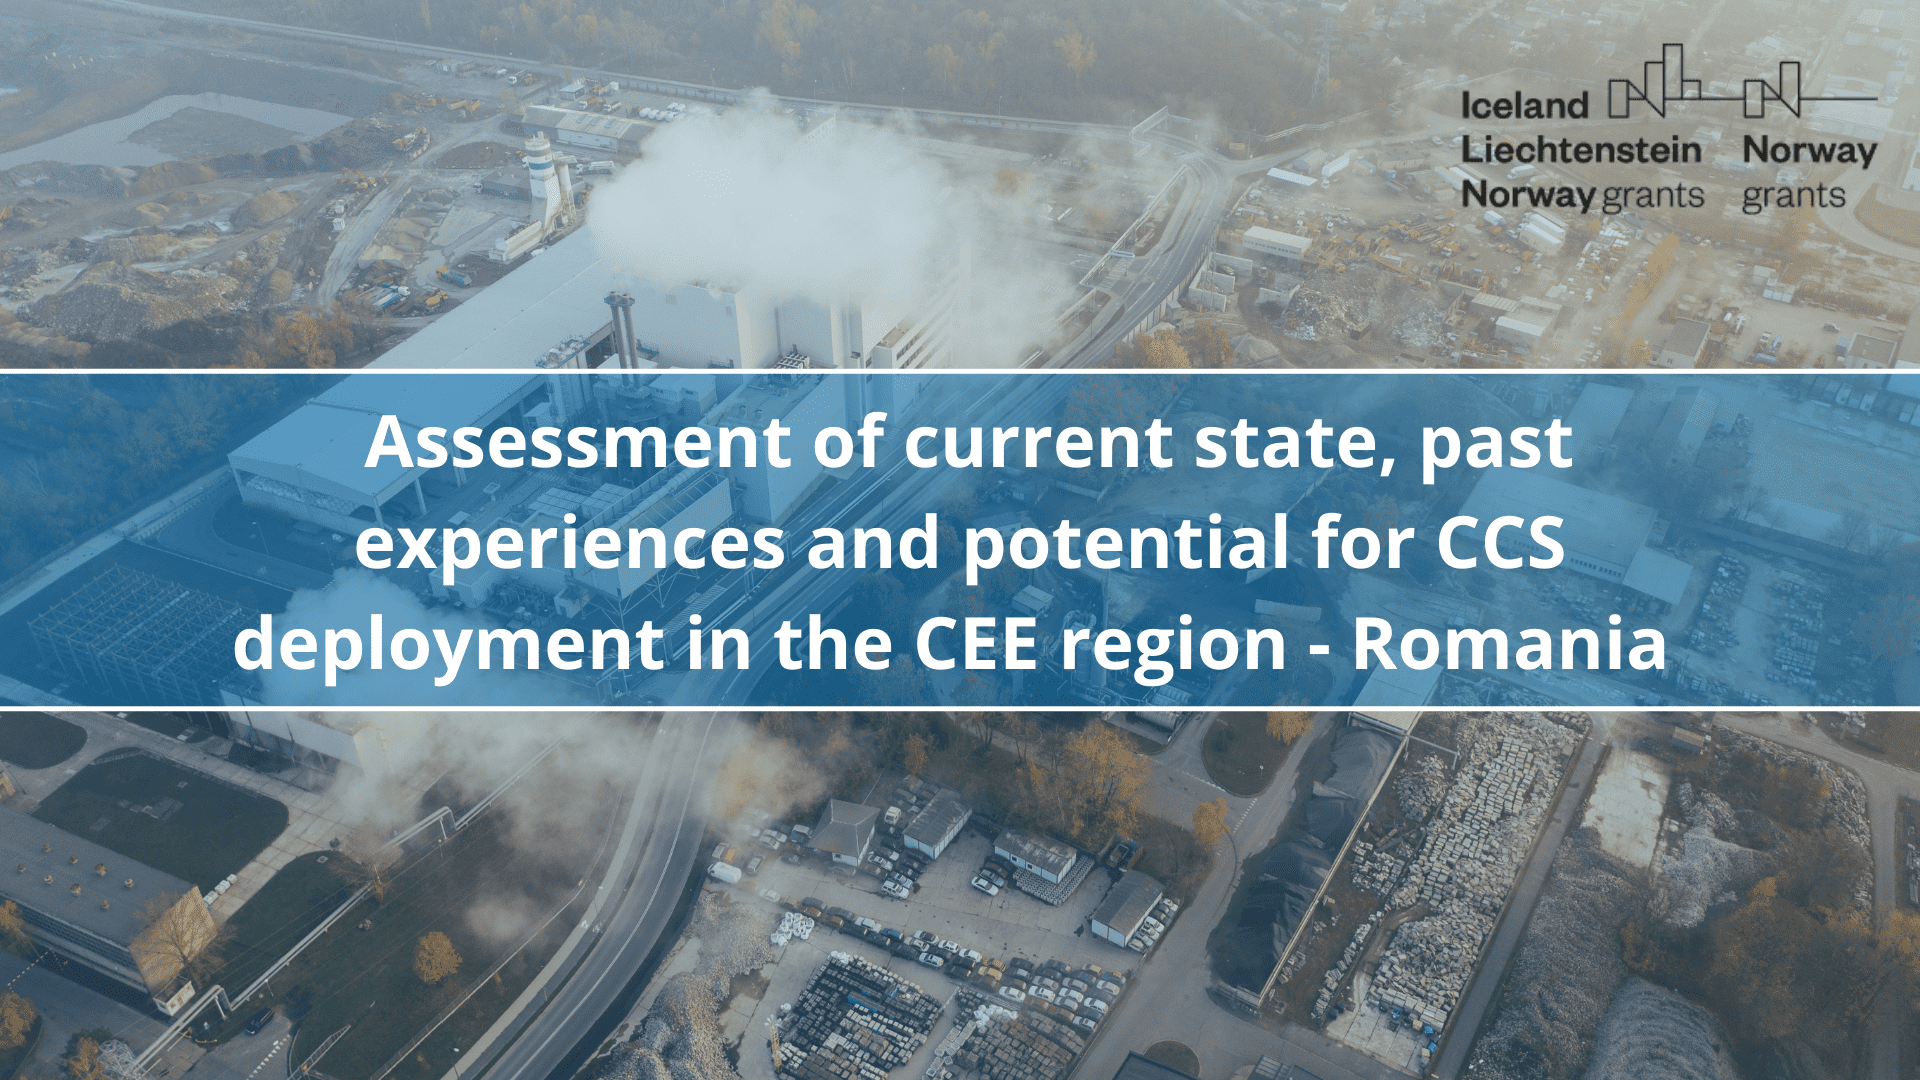 Assessment of current state, past experiences and potential for CCS deployment in the CEE region – Romania